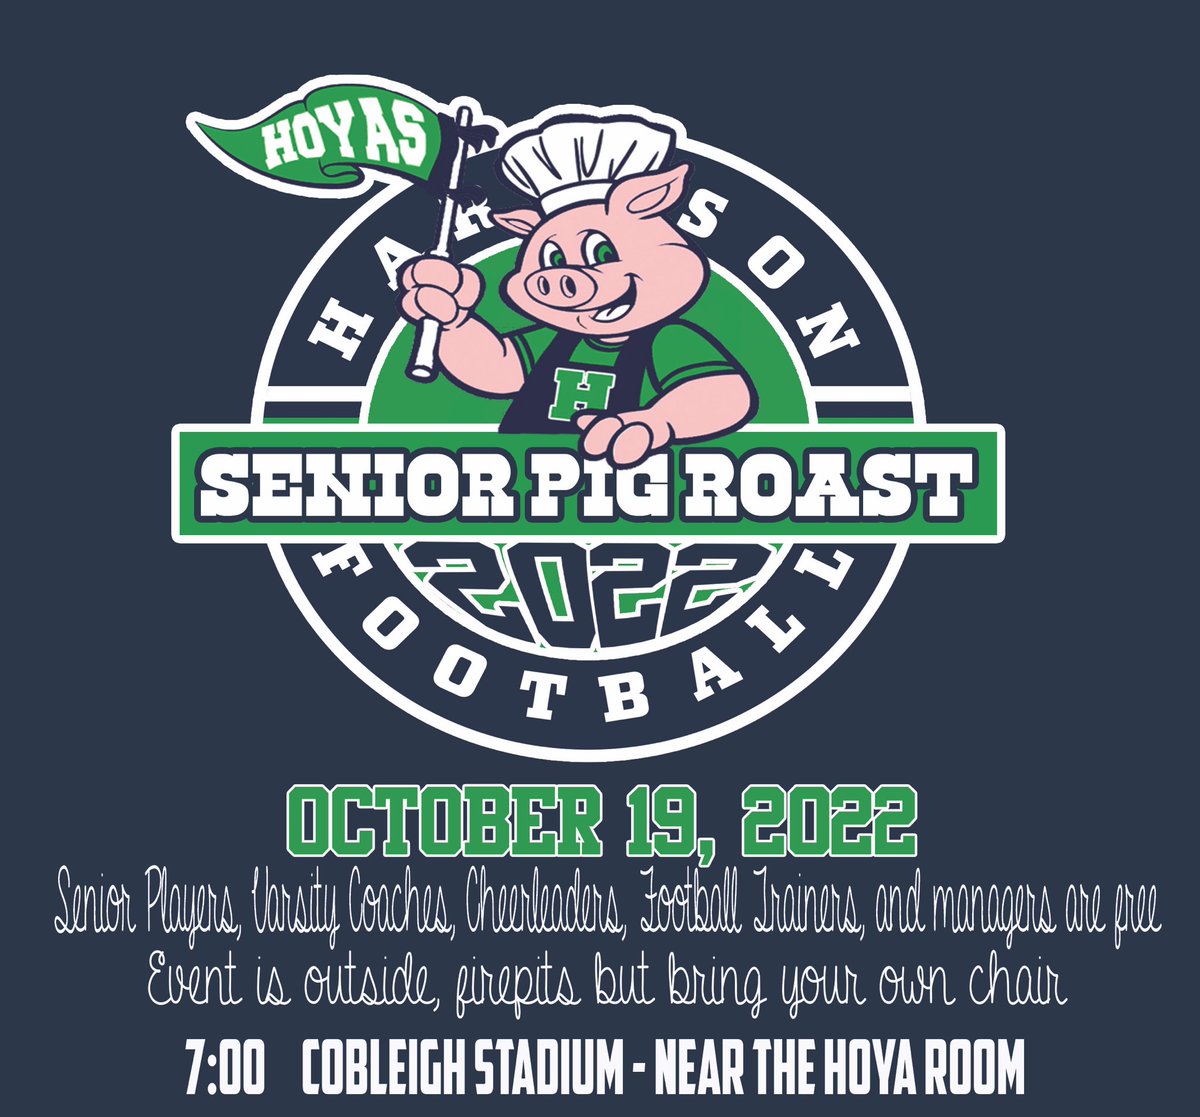 Tomorrow night we celebrate our seniors with a great #Hoyas 🏈 tradition 👏👏👏 #pigroast #whowilleattheeyeball 👁 🐷